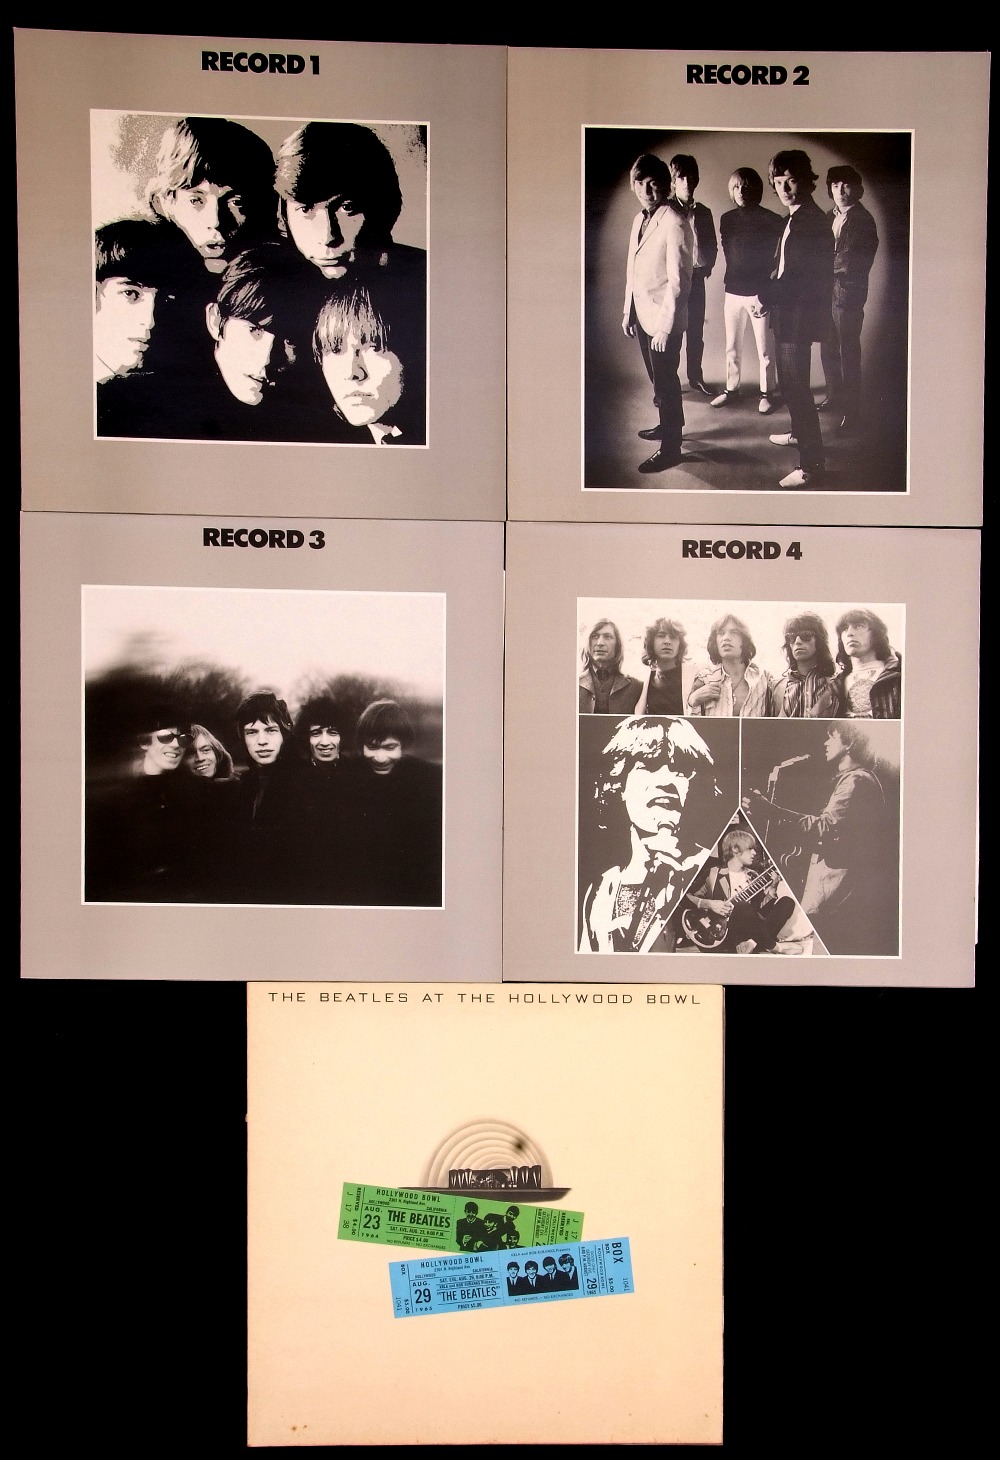 The Rolling Stones 'The Great Years' vinyl box set and 'The Beatles at the Hollywood Bowl'. - Image 2 of 2